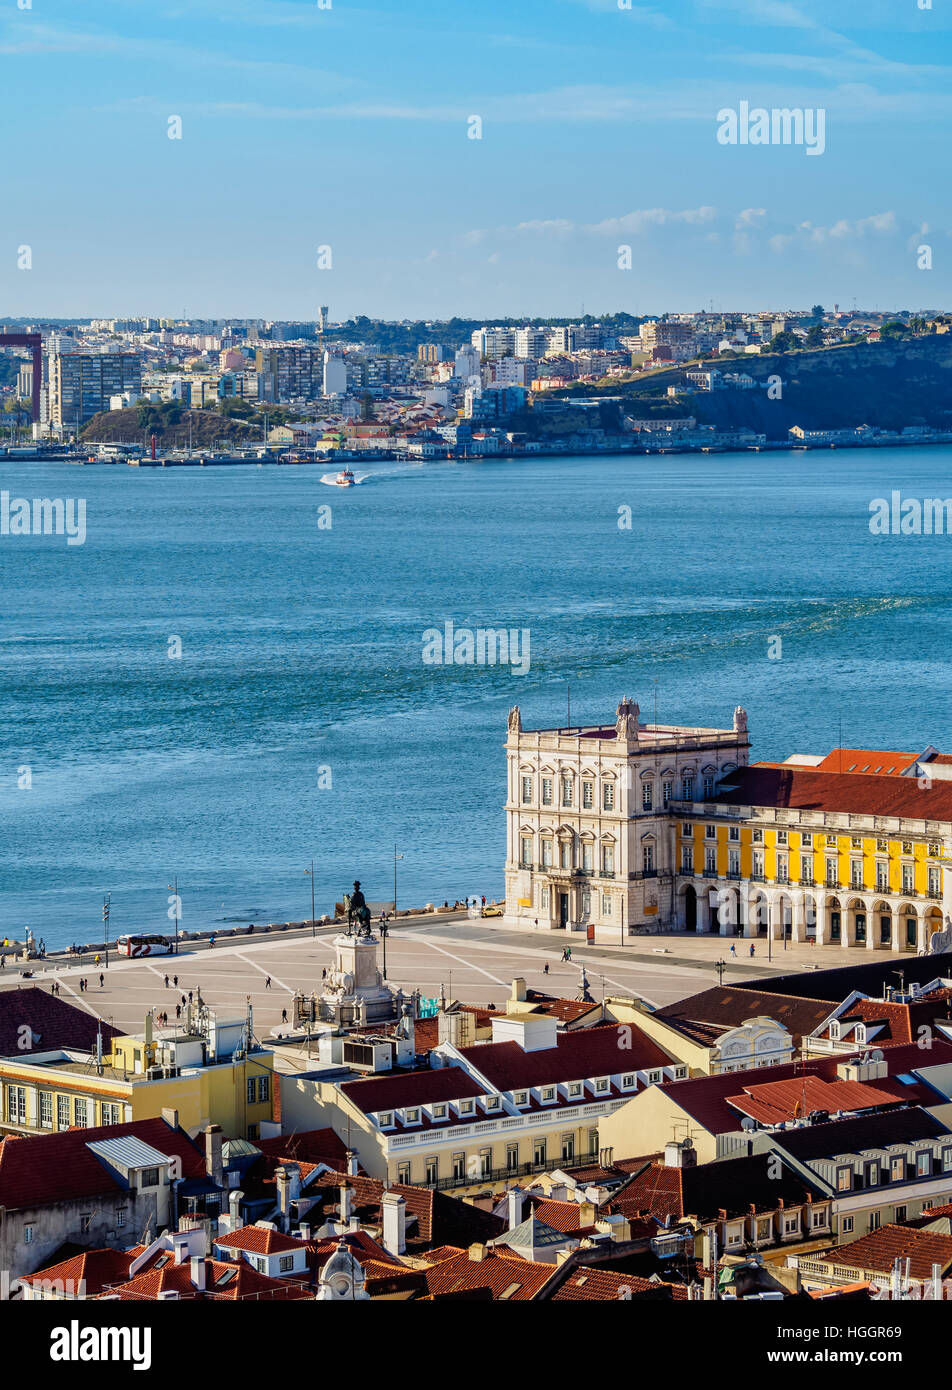 Portugal, Lisbon, Praca do Comercio and Tagus River viewed from the Sao Jorge Castle. Stock Photo